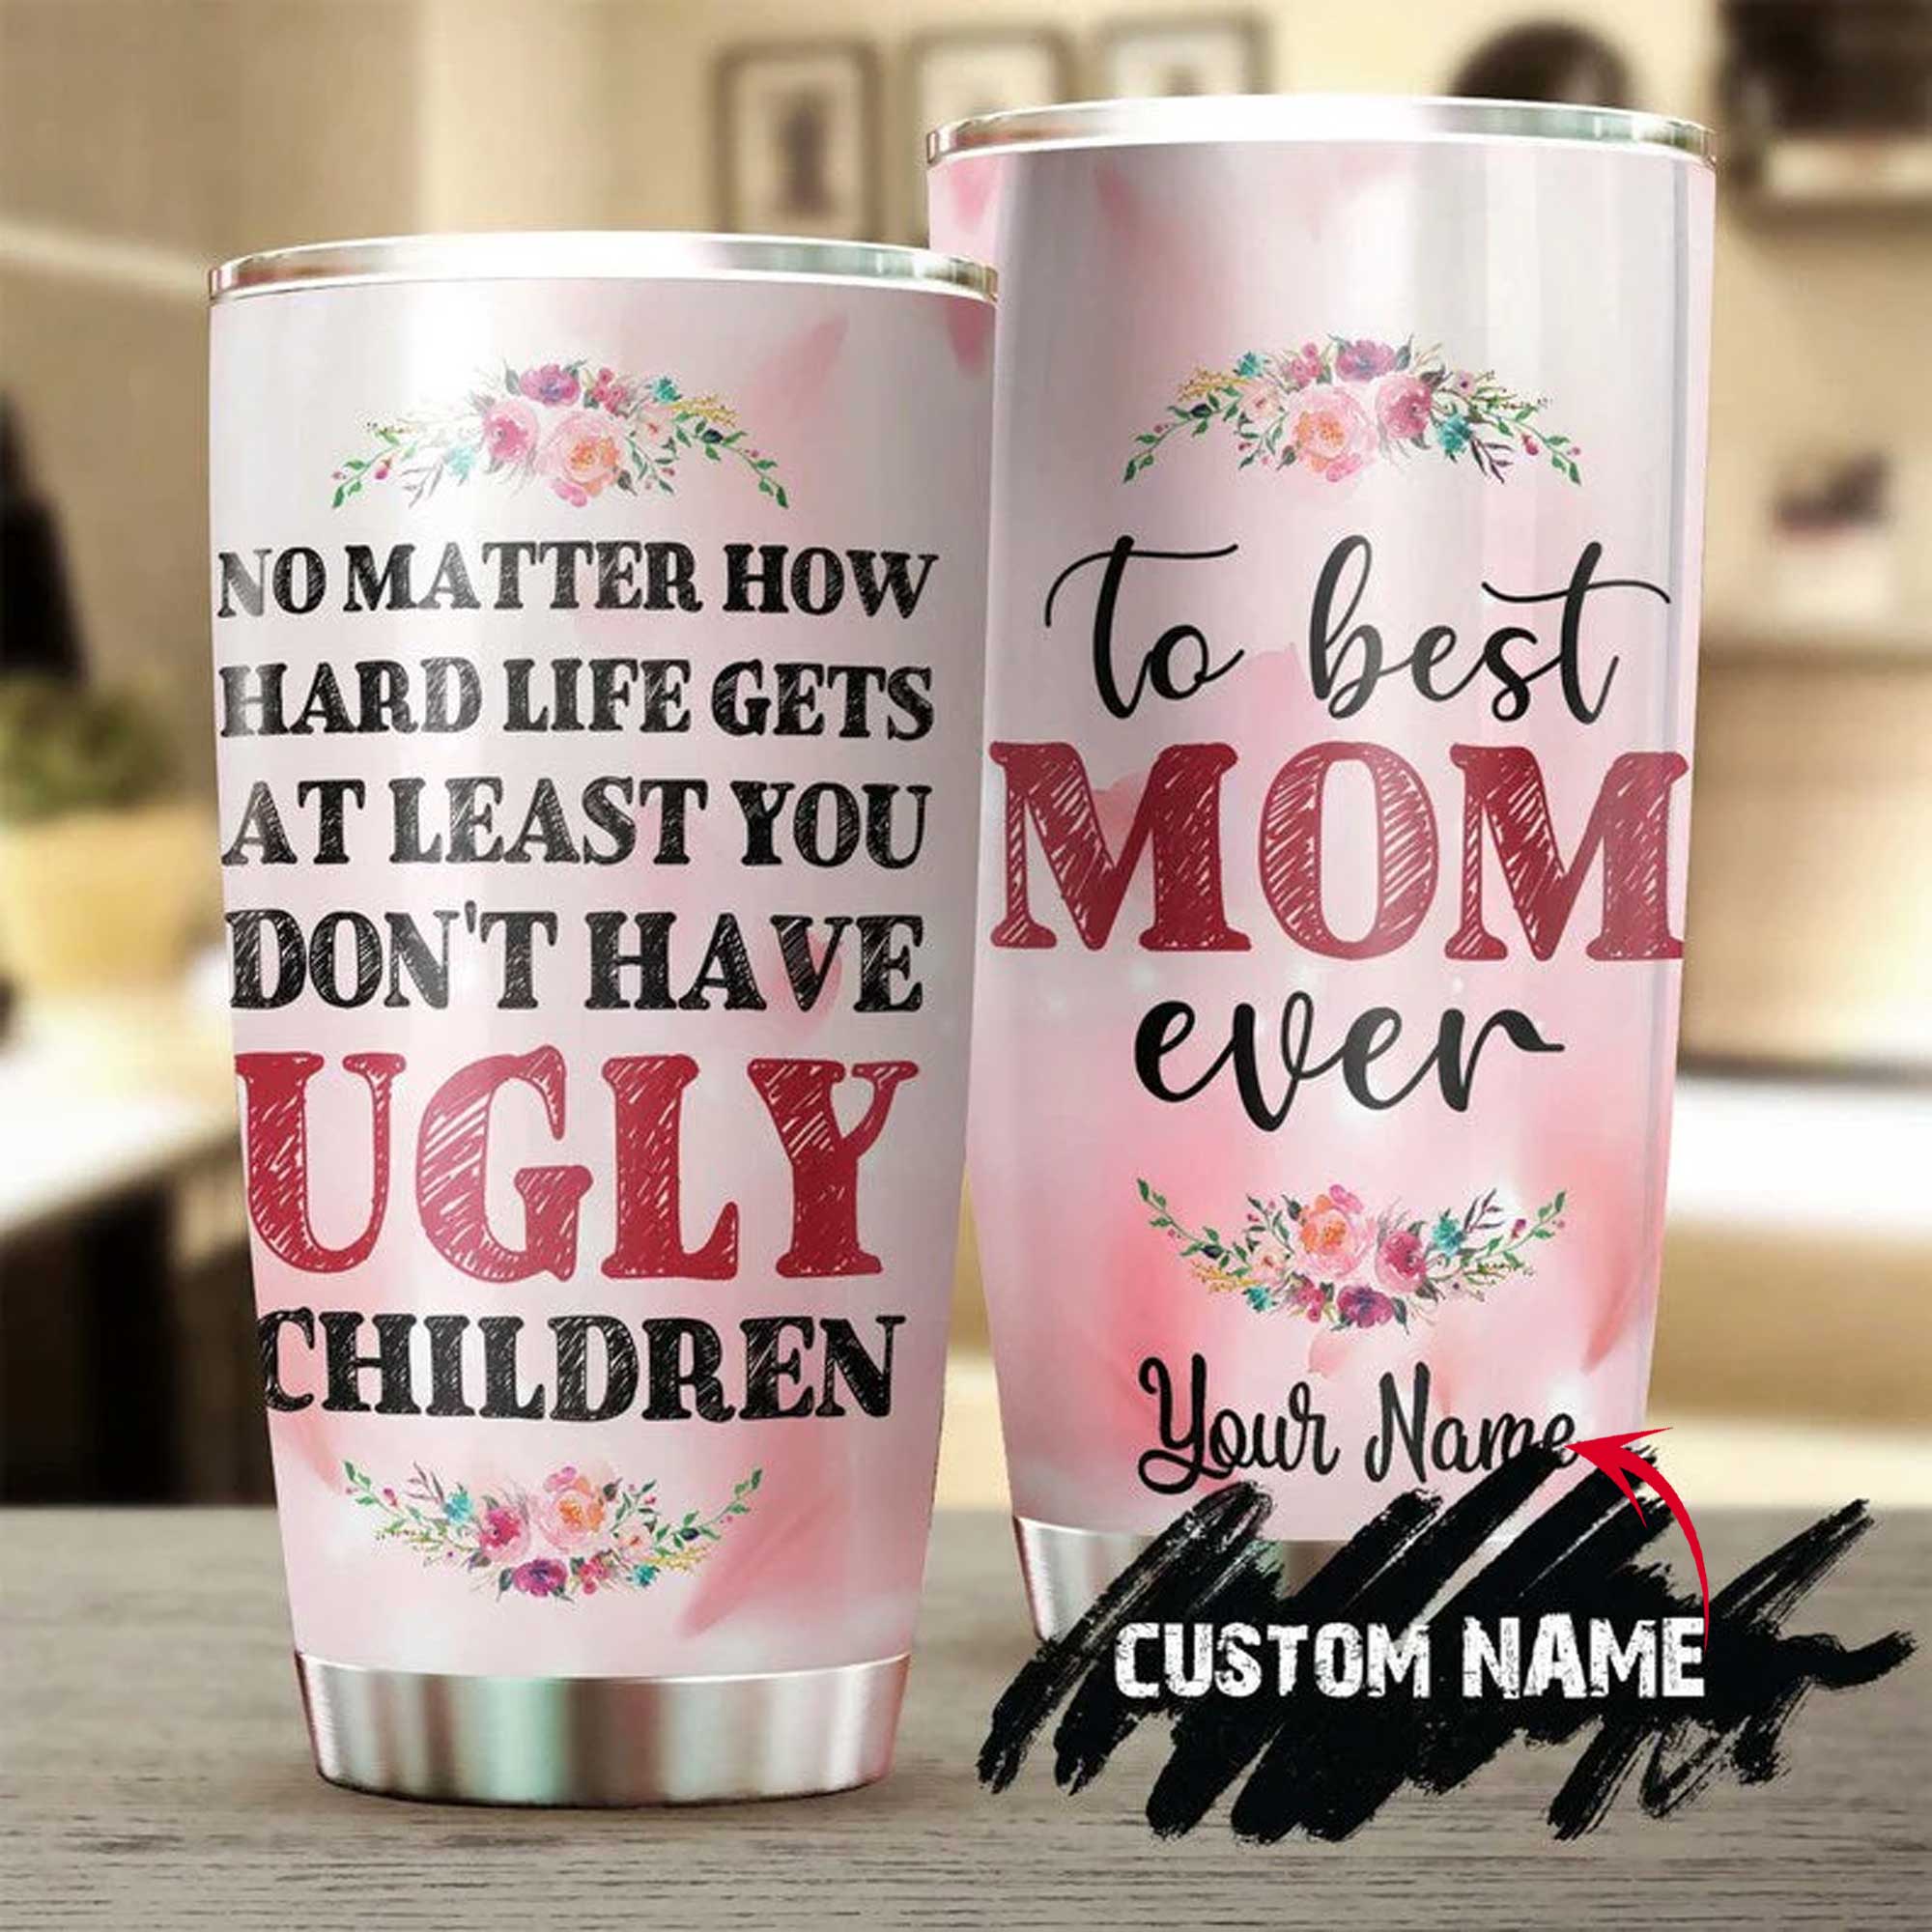 Personalized Mother's Day Gift Tumbler - Custom Gift For Mother's Day, Presents For Mom - At Least You Don't Have Ugly Children Funny Tumbler